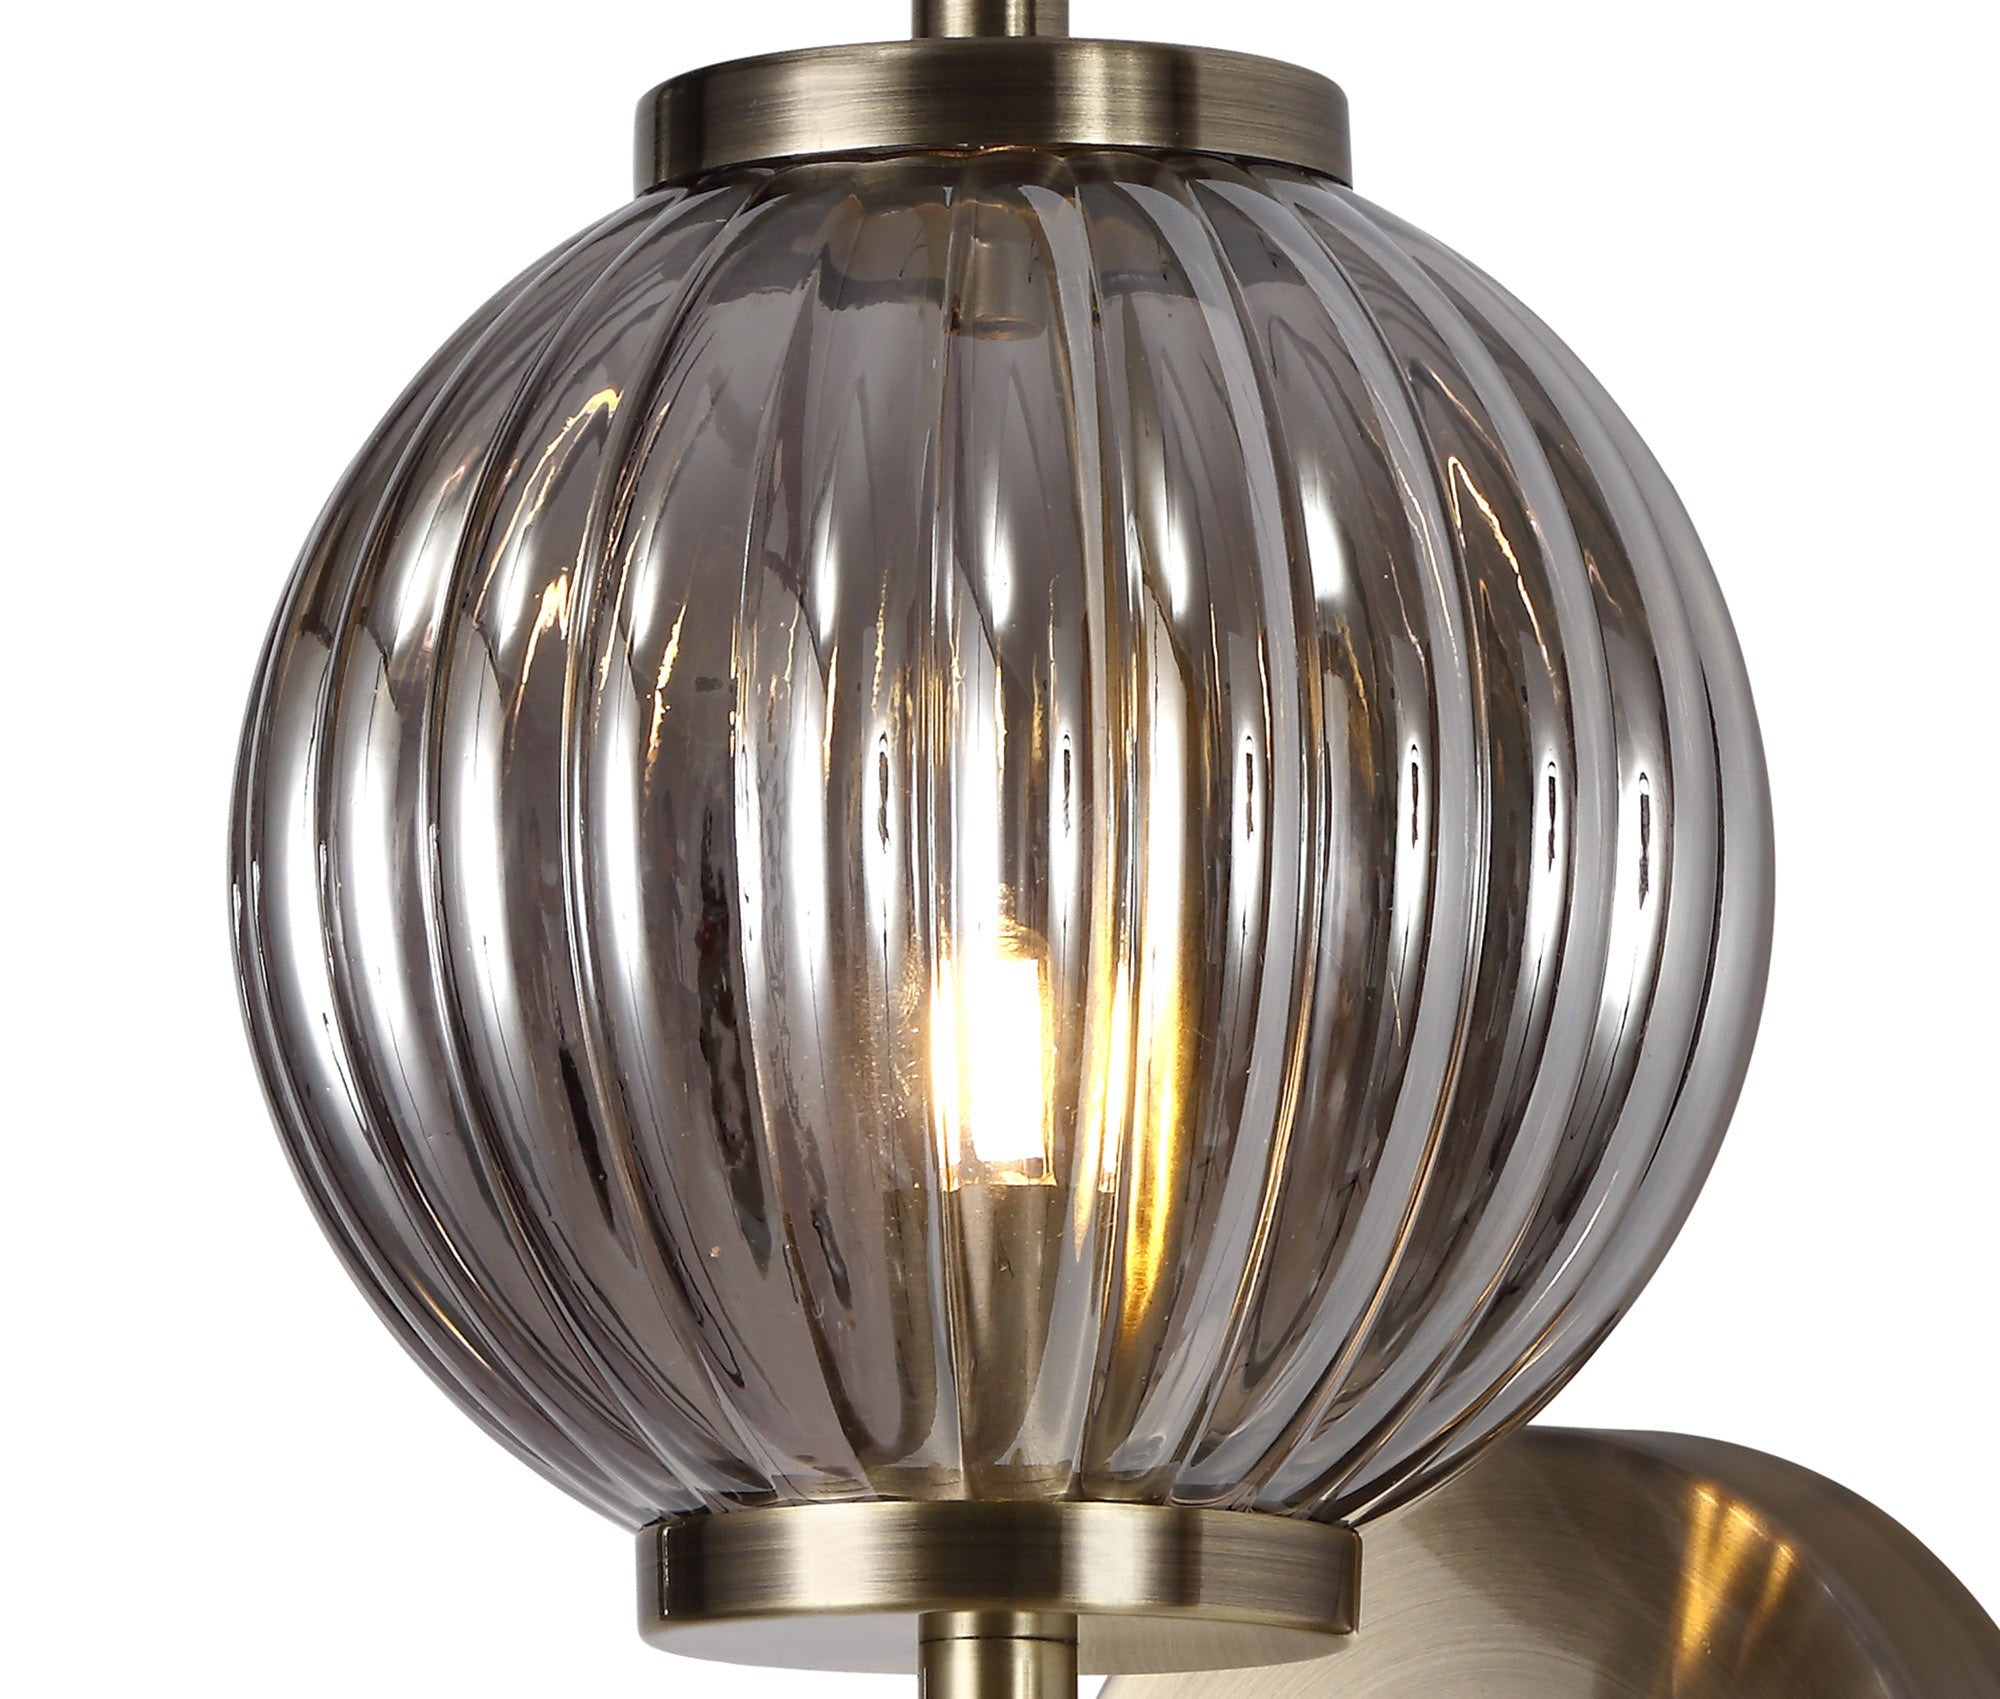 Farra Wall Lamp, 1 x G9, Antique Brass/Smoked Glass LO174433